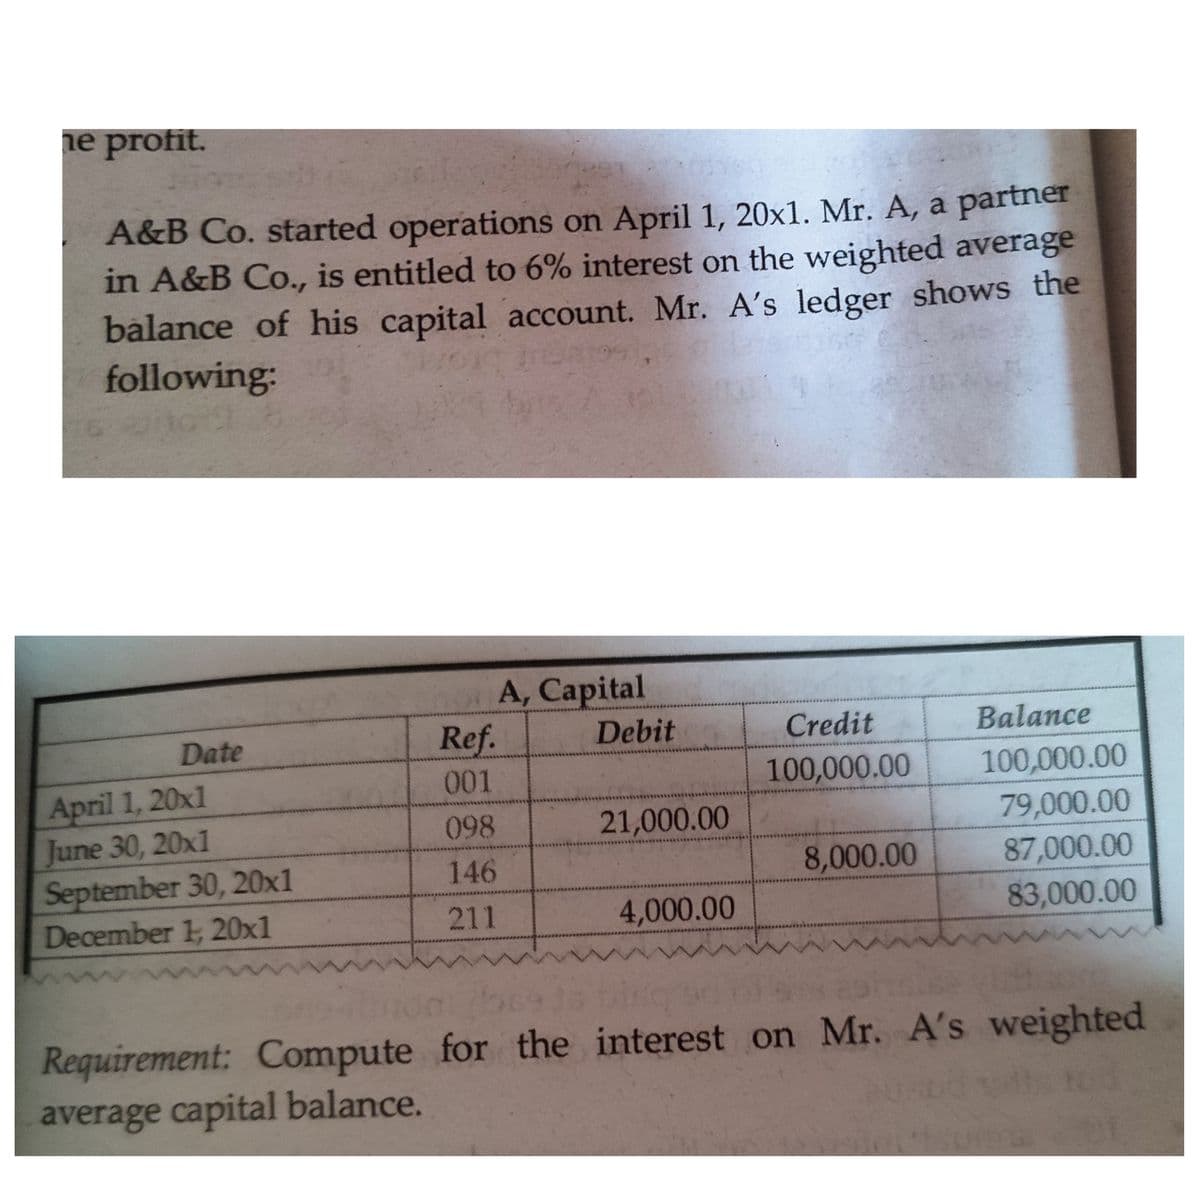 ne profit.
A&B Co. started operations on April 1, 20x1. Mr. A, a partner
in A&B Co., is entitled to 6% interest on the weighted average
balance of his capital account. Mr. A's ledger shows the
following:
A, Capital
Ref.
Date
Debit
Credit
Balance
100,000.00
79,000.00
87,000.00
001
100,000.00
April 1, 20x1
June 30, 20x1
September 30, 20x1
December 1, 20x1
(98
21,000.00
146
8,000.00
211
4,000.00
83,000.00
Requirement: Compute for the interest on Mr. A's weighted
average capital balance.
